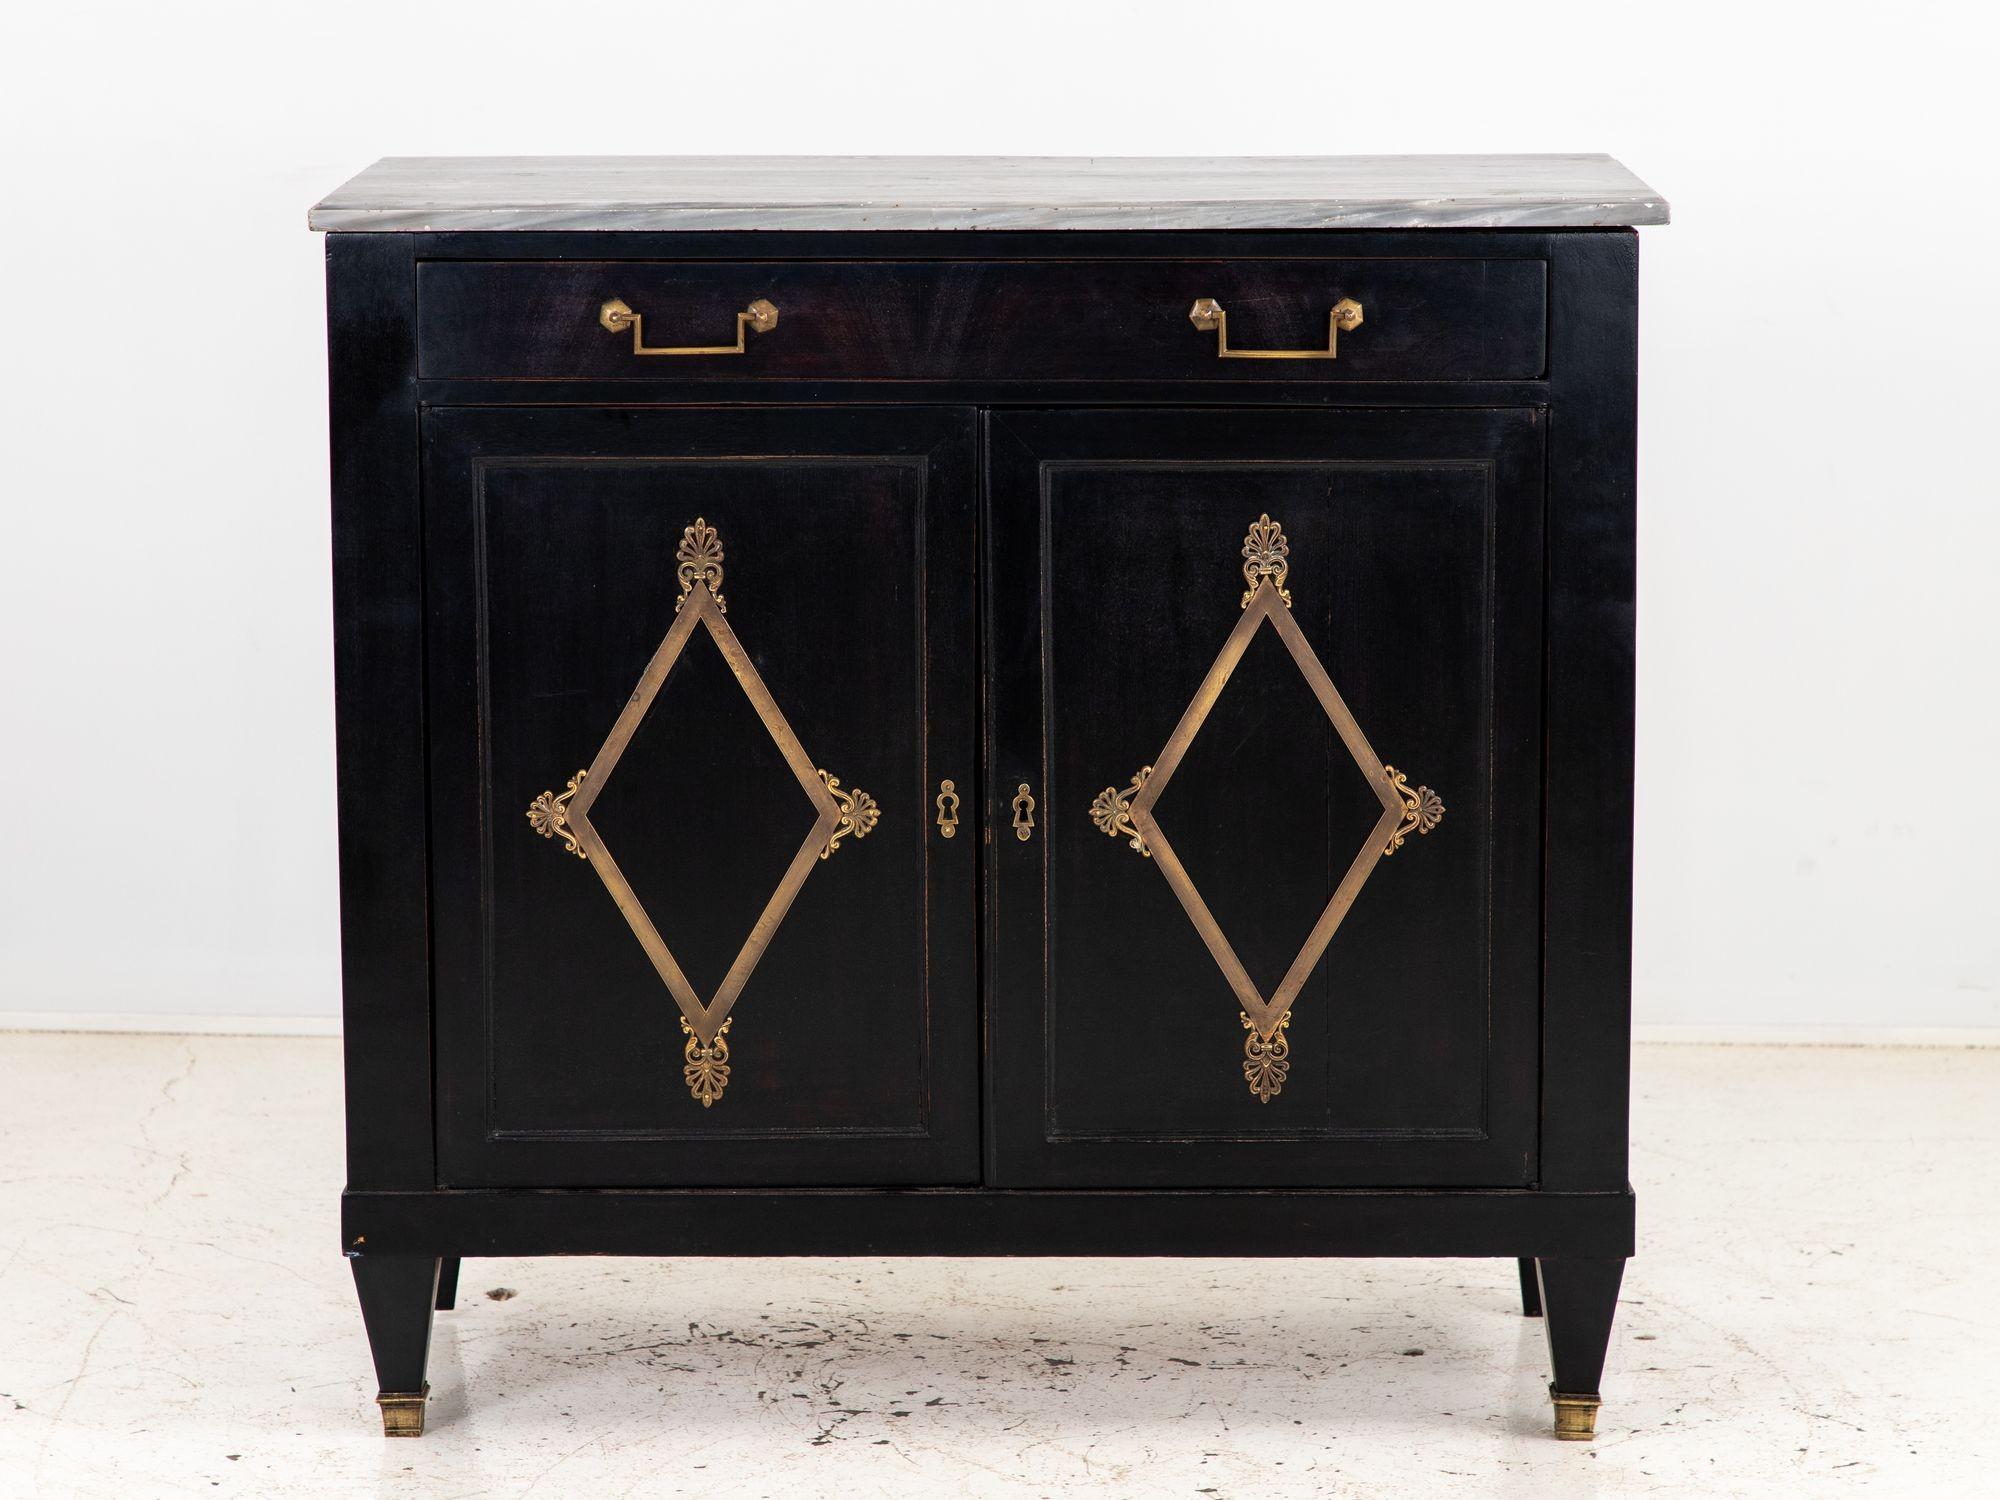 This later black-painted buffet with a luxurious marble top exudes sophistication and timeless style. Its sleek black finish adds an air of refinement to any space, while the two elegantly crafted doors are adorned with brass lozenge details that